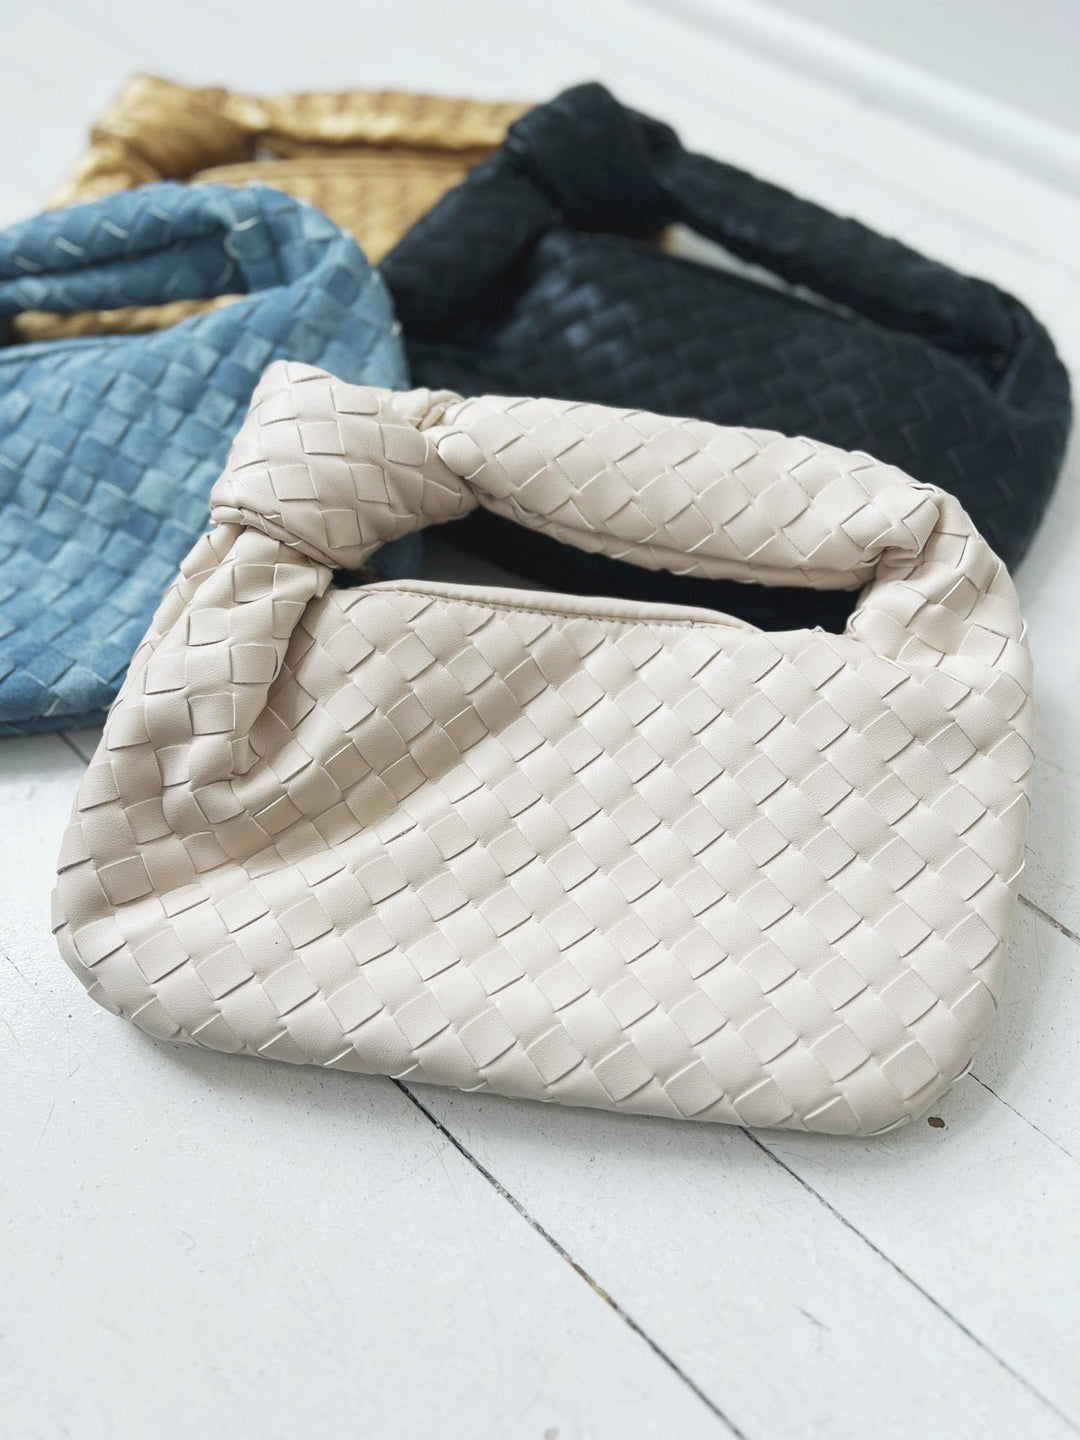 Woven Knotted Handbag - Spring Sweet